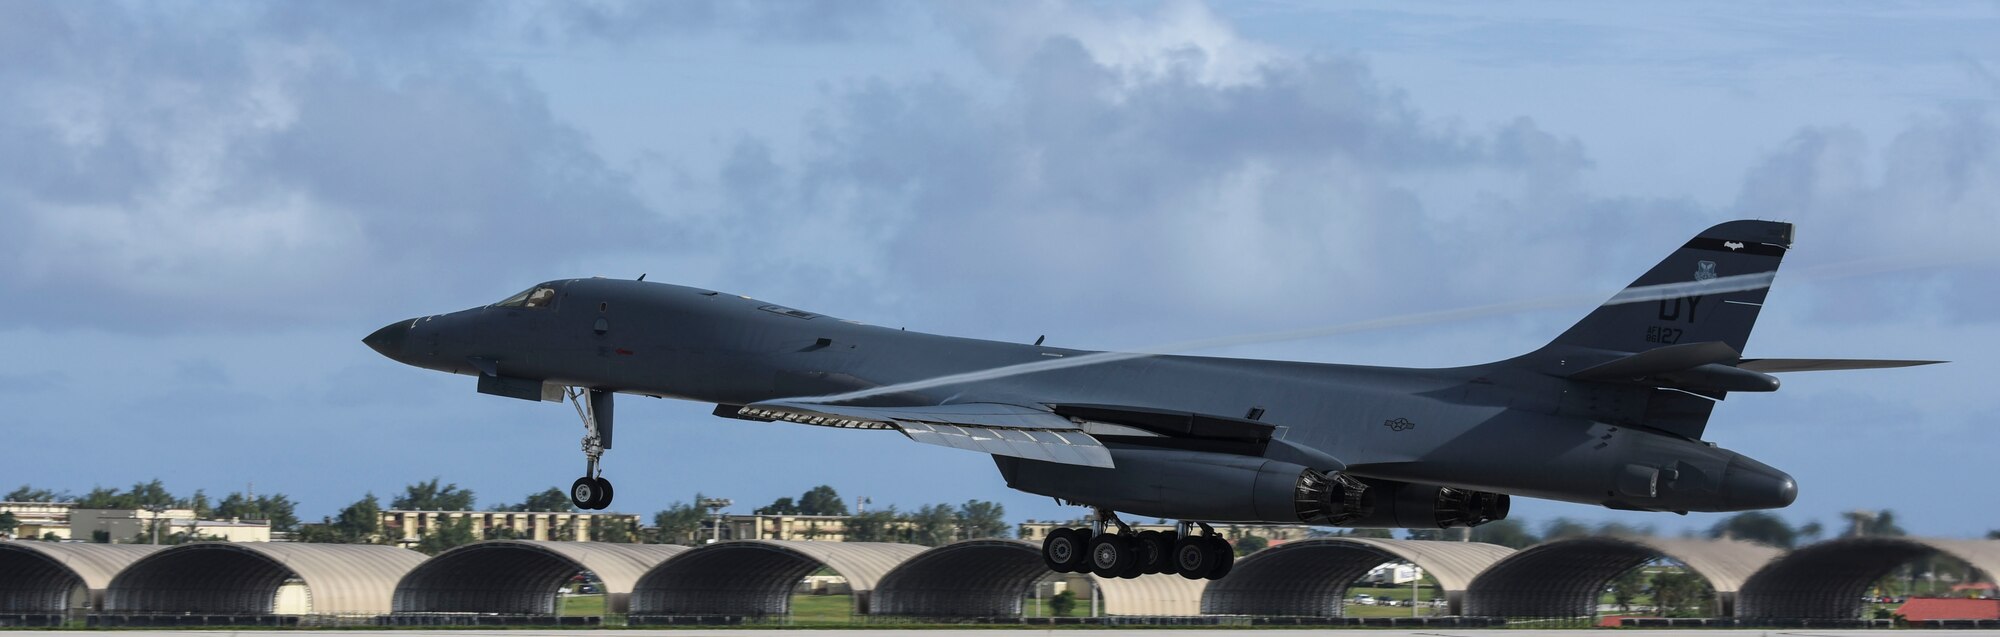 A U.S. Air Force B-1B Lancer assigned to the 9th Expeditionary Bomb Squadron, deployed from Dyess Air Force Base, Texas, lands Feb. 6, 2017, at Andersen AFB, Guam. The 9th EBS is taking over U.S. Pacific Command’s Continuous Bomber Presence operations from the 34th EBS, assigned to Ellsworth Air Force Base, S.D. The B-1B's blended wing/body configuration, variable-geometry wings and turbofan afterburning engines, combine to provide long range, maneuverability and high speed while enhancing survivability. The rotation of aircraft in support is specifically designed to demonstrate the U.S.’s commitment to the Indo-Asia-Pacific region and enhance routine transiting in international airspace throughout the Pacific. (U.S. Air Force photo by Tech. Sgt. Richard P. Ebensberger/Released)